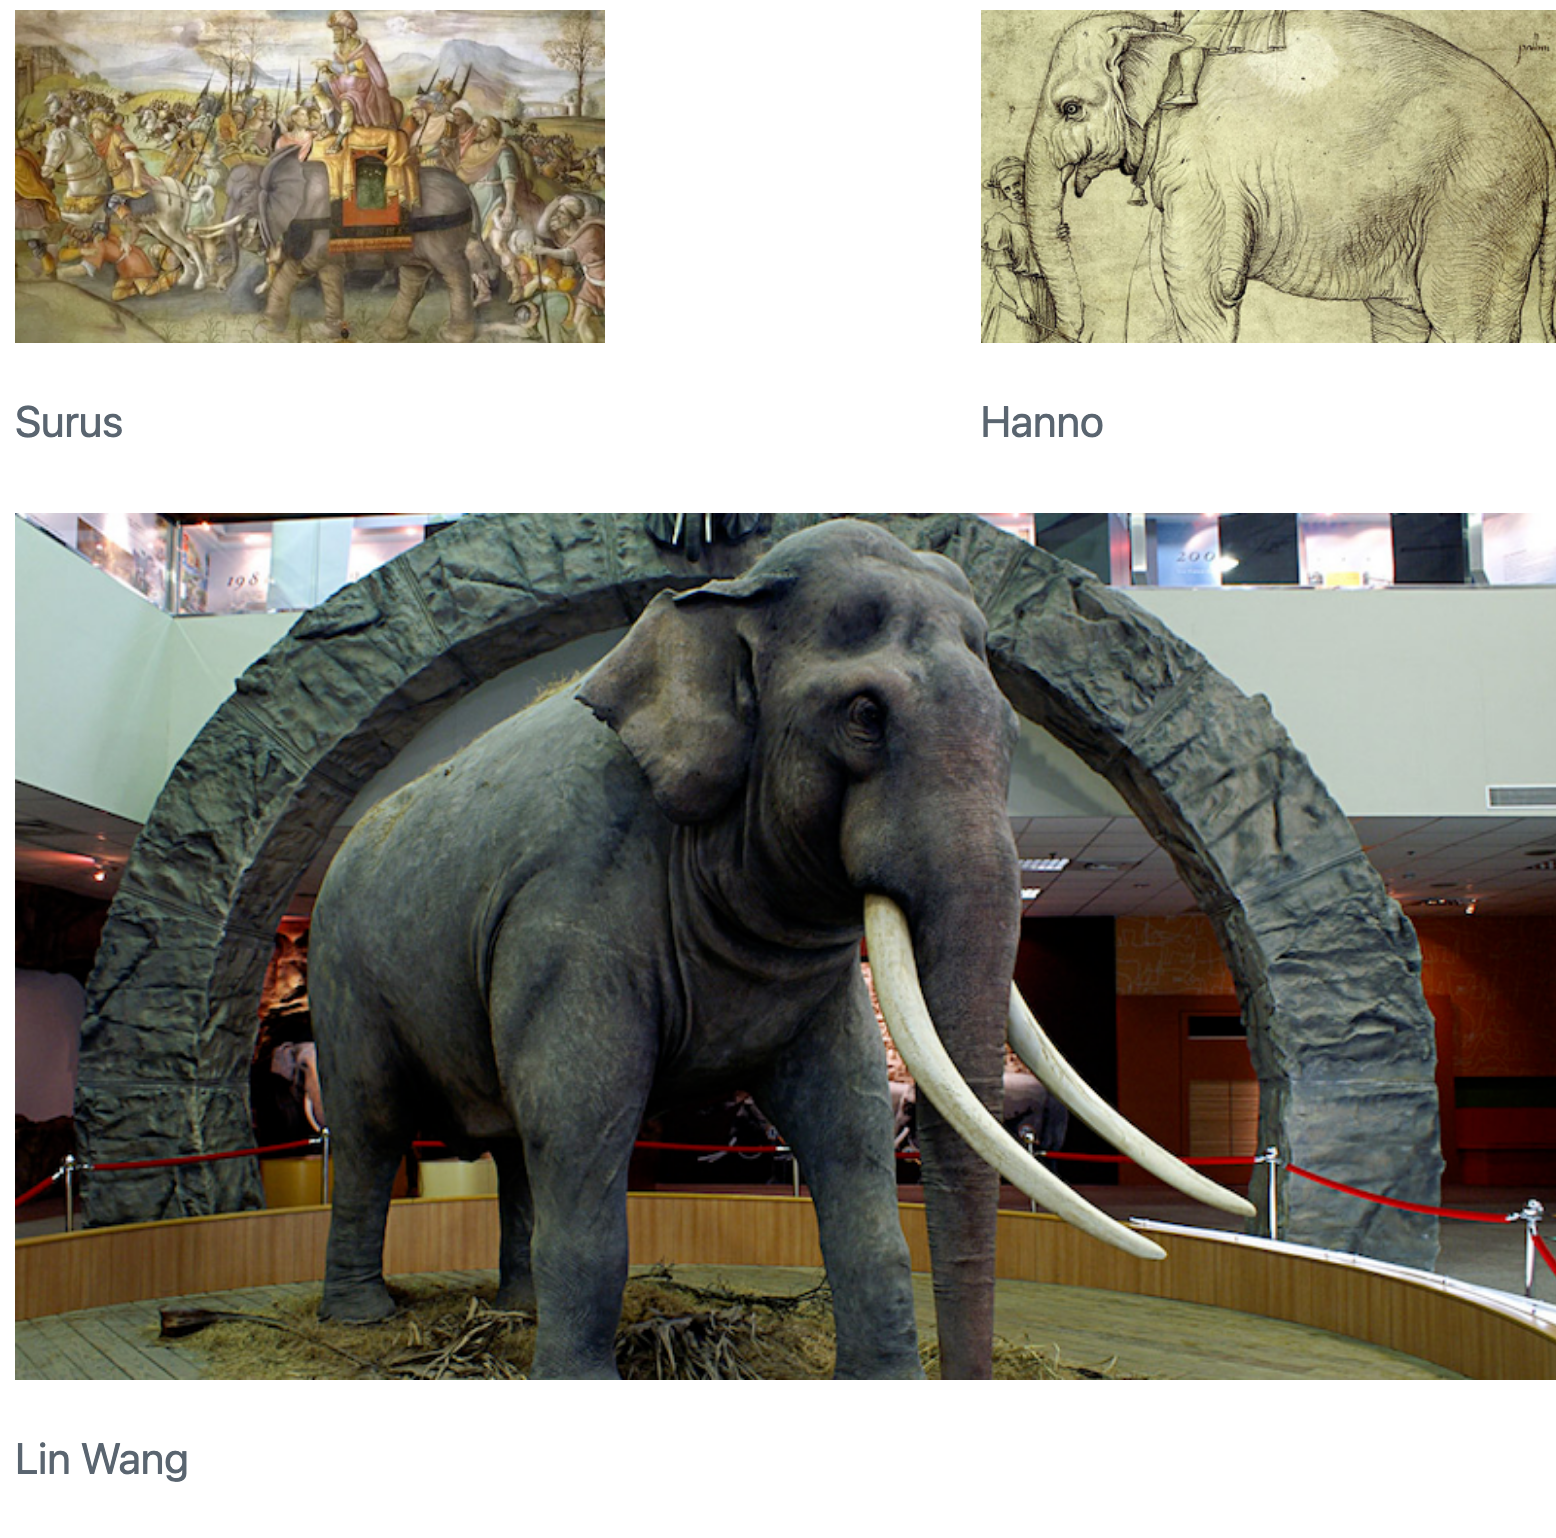 Three elephant pictures are arranged with two side-by-side in the first row, labeled 'Surus' on the left and 'Hanno' on the right, separated by whitespace. Below these, a larger image captioned 'Lin Wang' spans the combined width and height of the top row images.